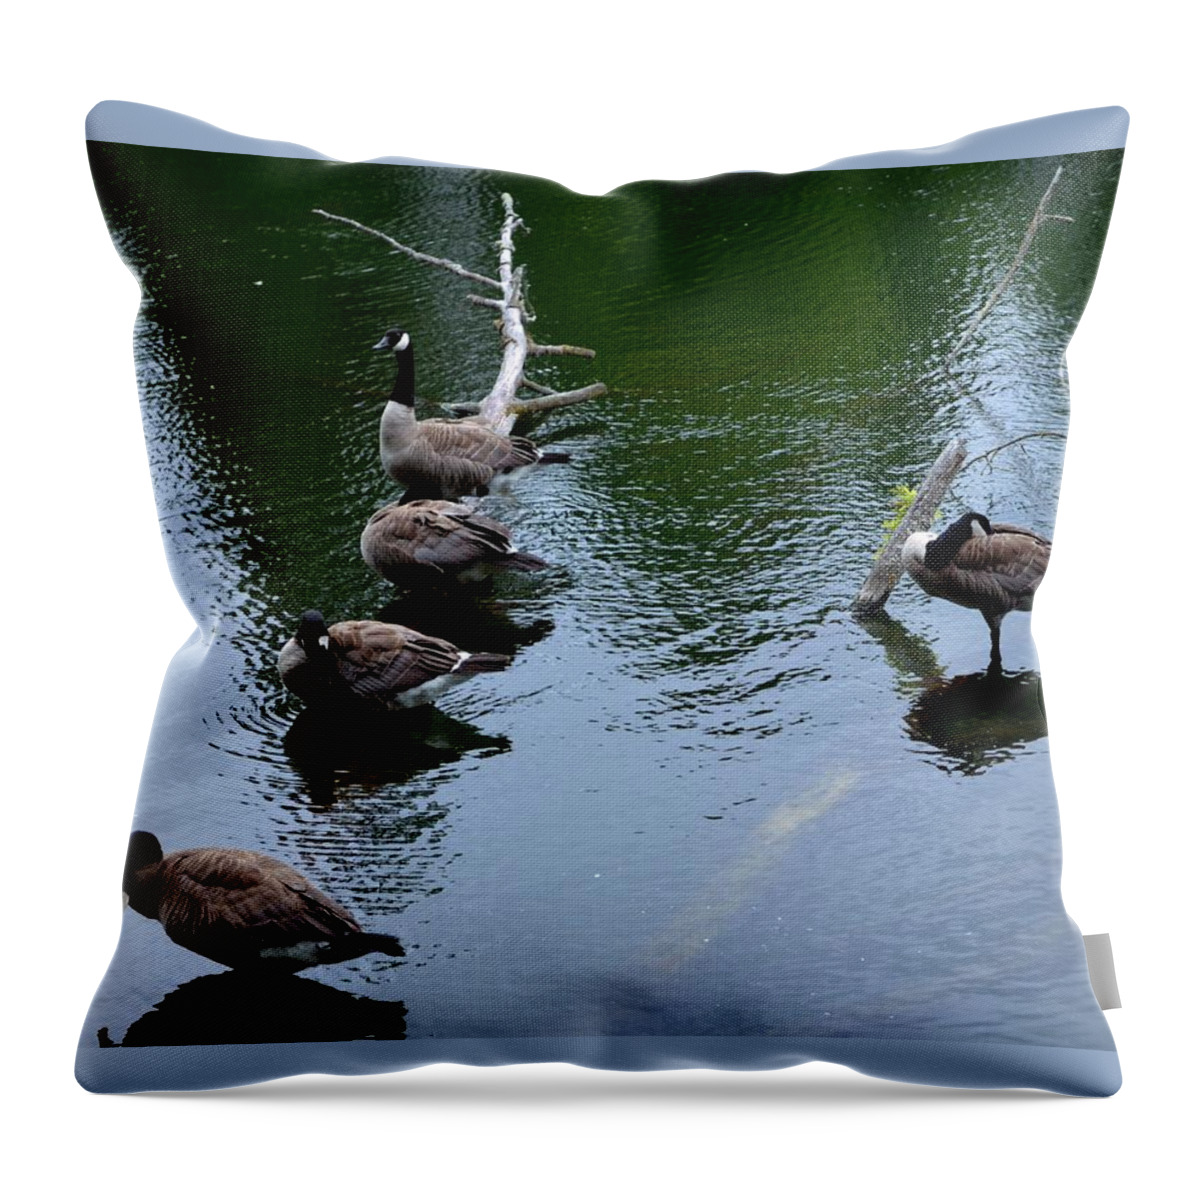 Outcast Throw Pillow featuring the photograph Outcast by Laureen Murtha Menzl